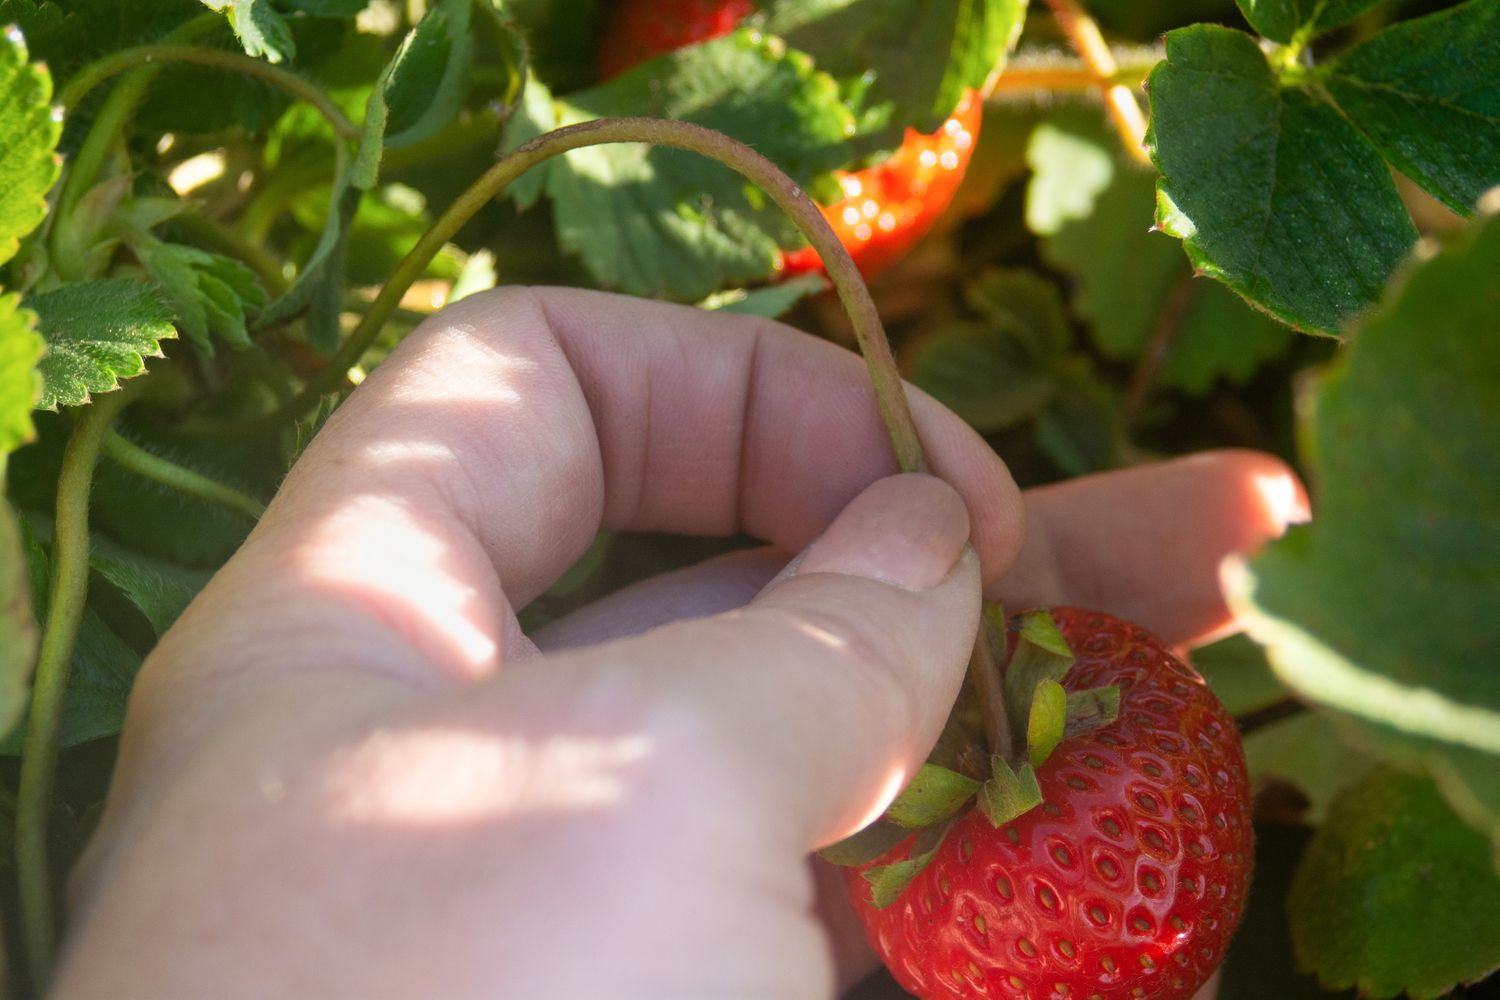 Strawberry stem being snapped by hand to harvest closeup